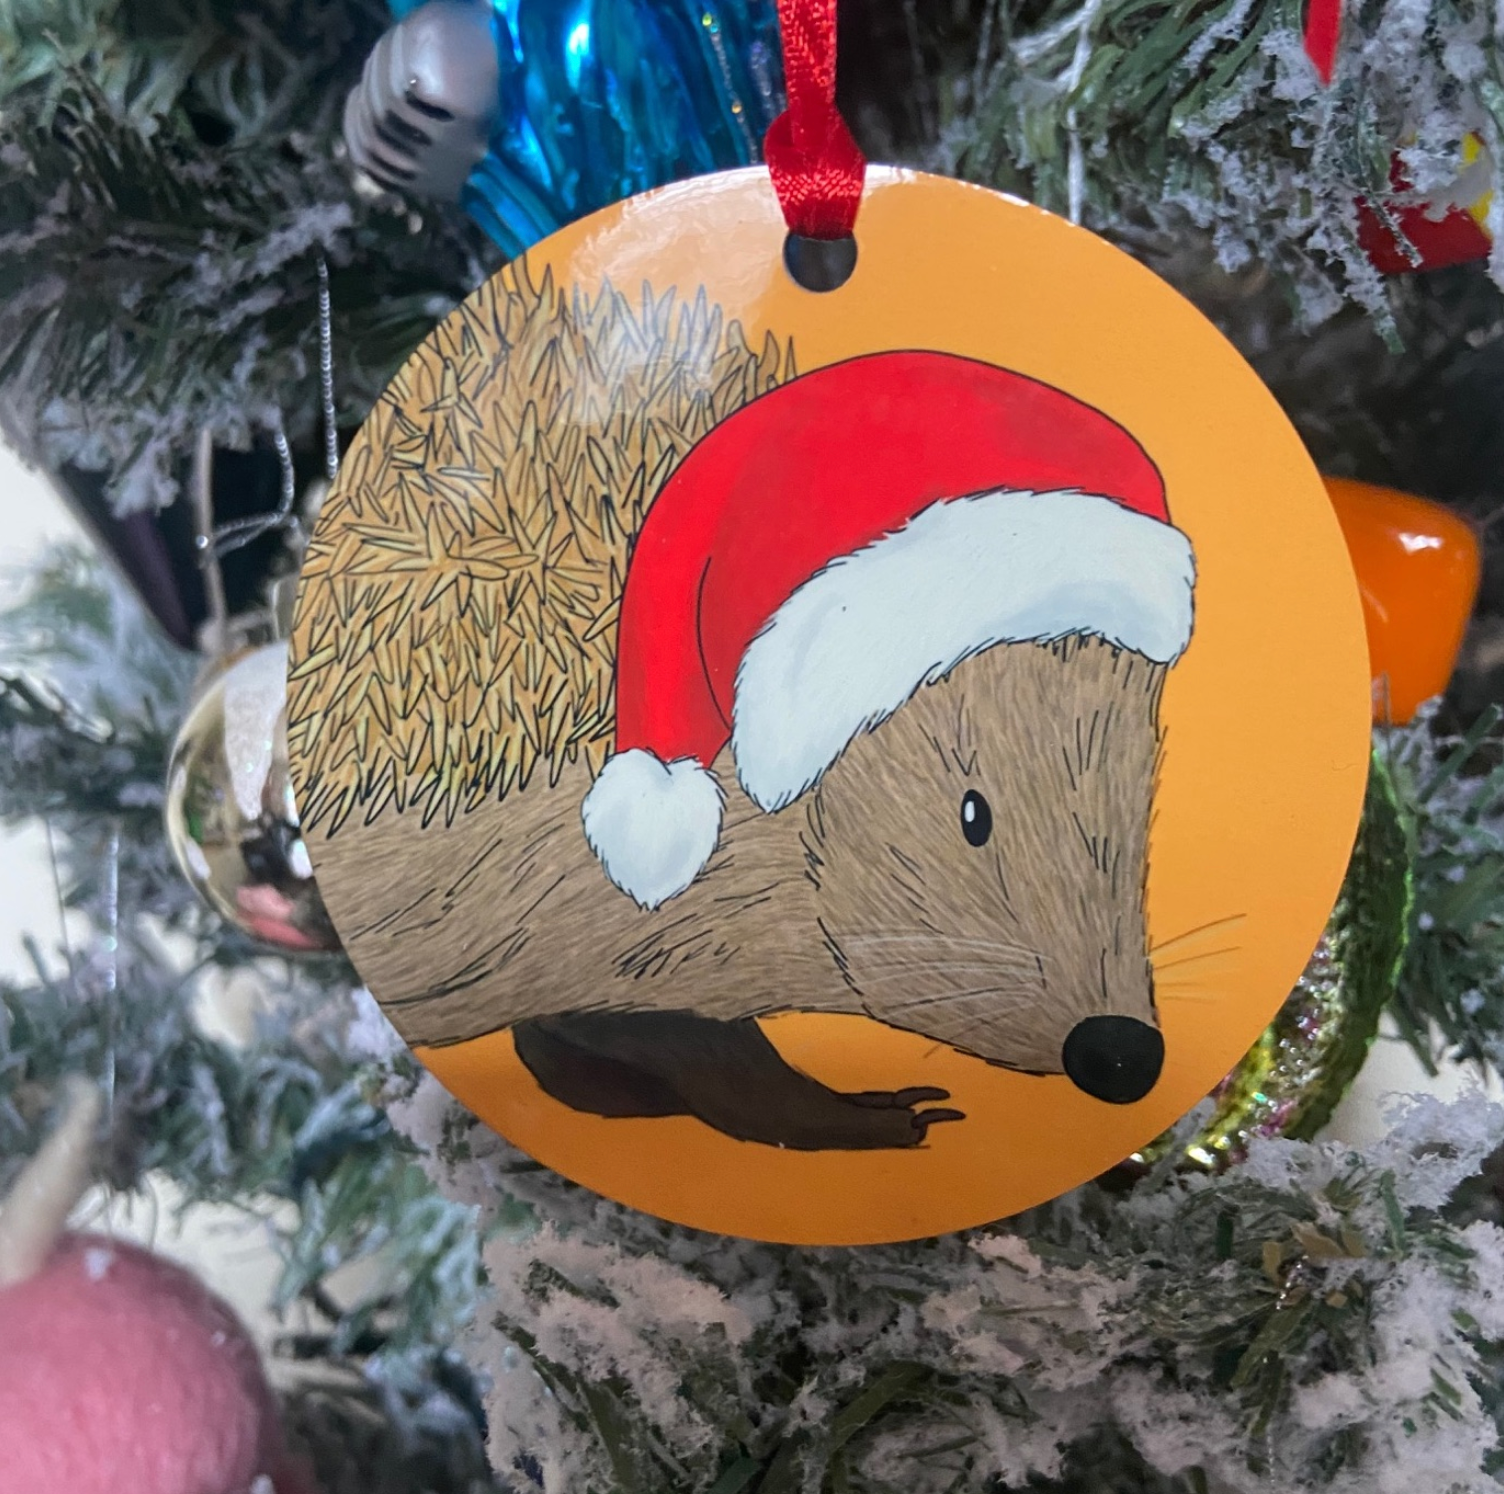 A christmas tree decoration featuring a handdrawn image of a hedgehog wearing a Christmas hat